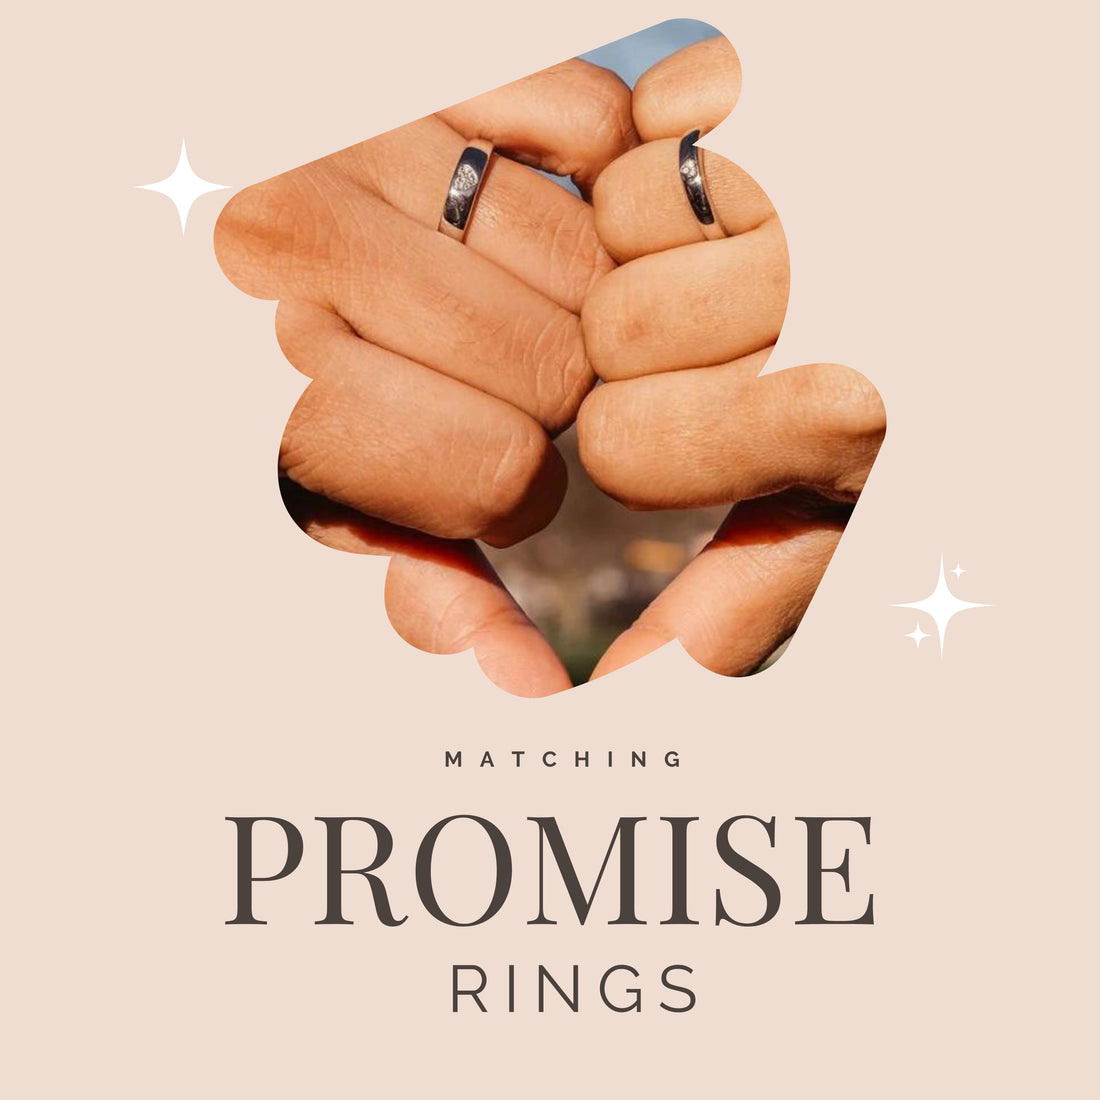 Matching promise rings